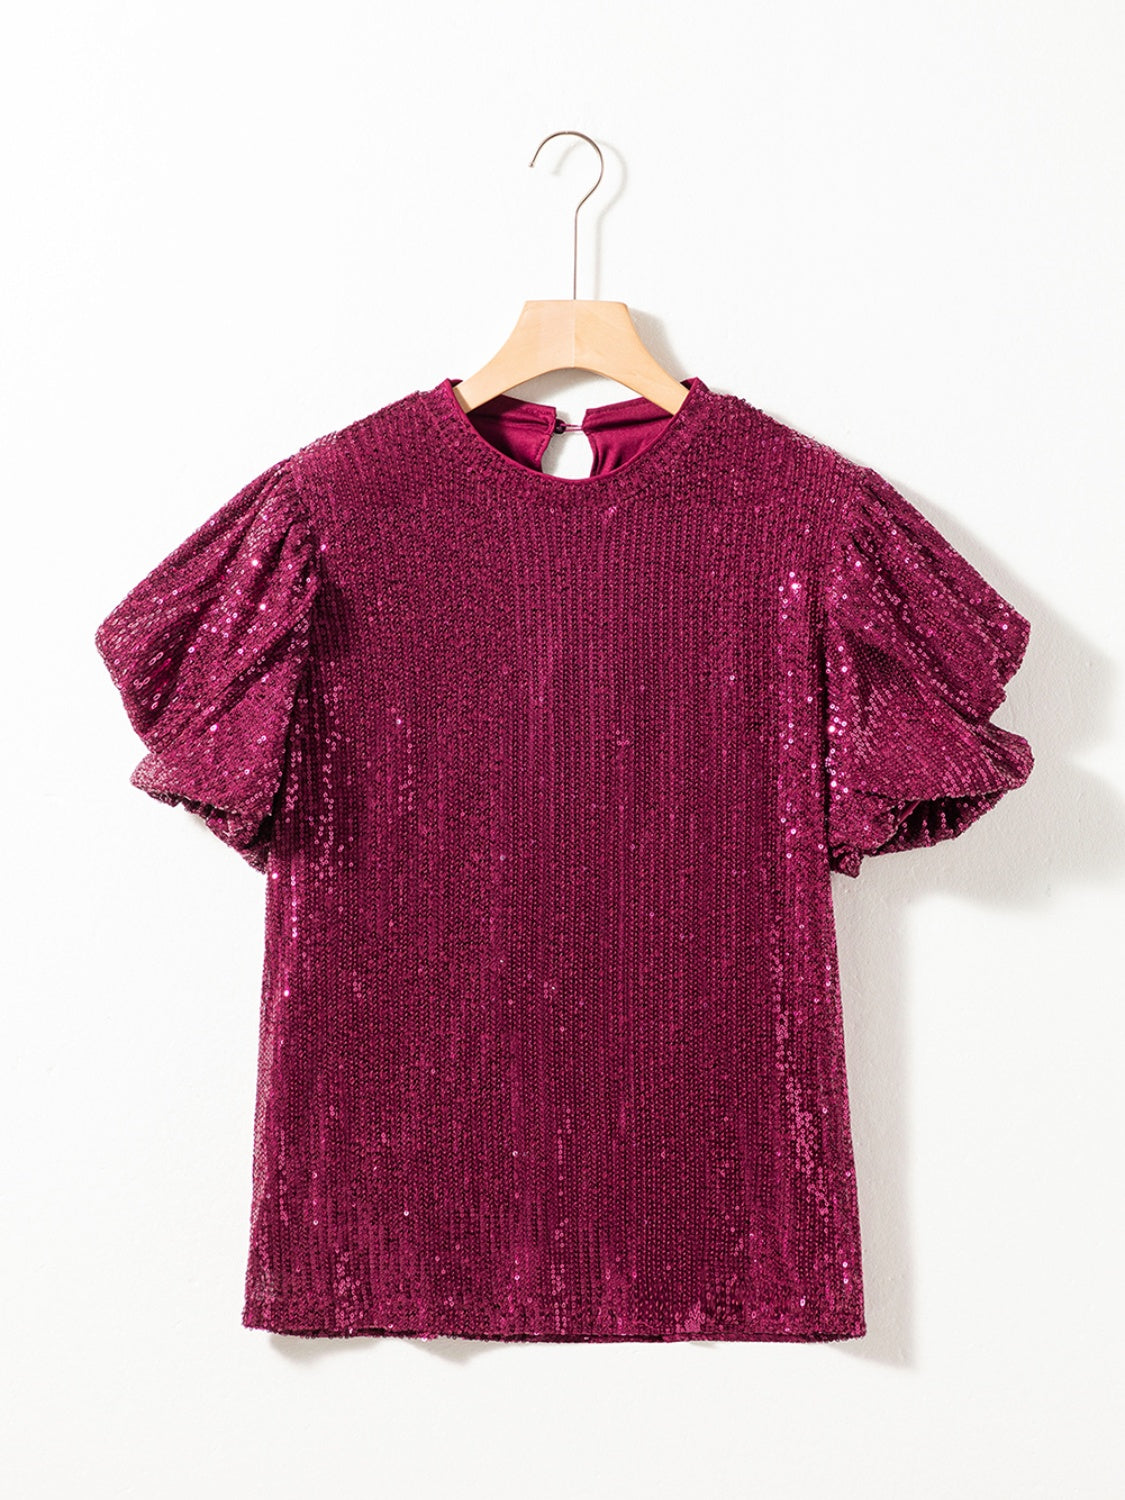 Get Your Attention Sequin Blouse